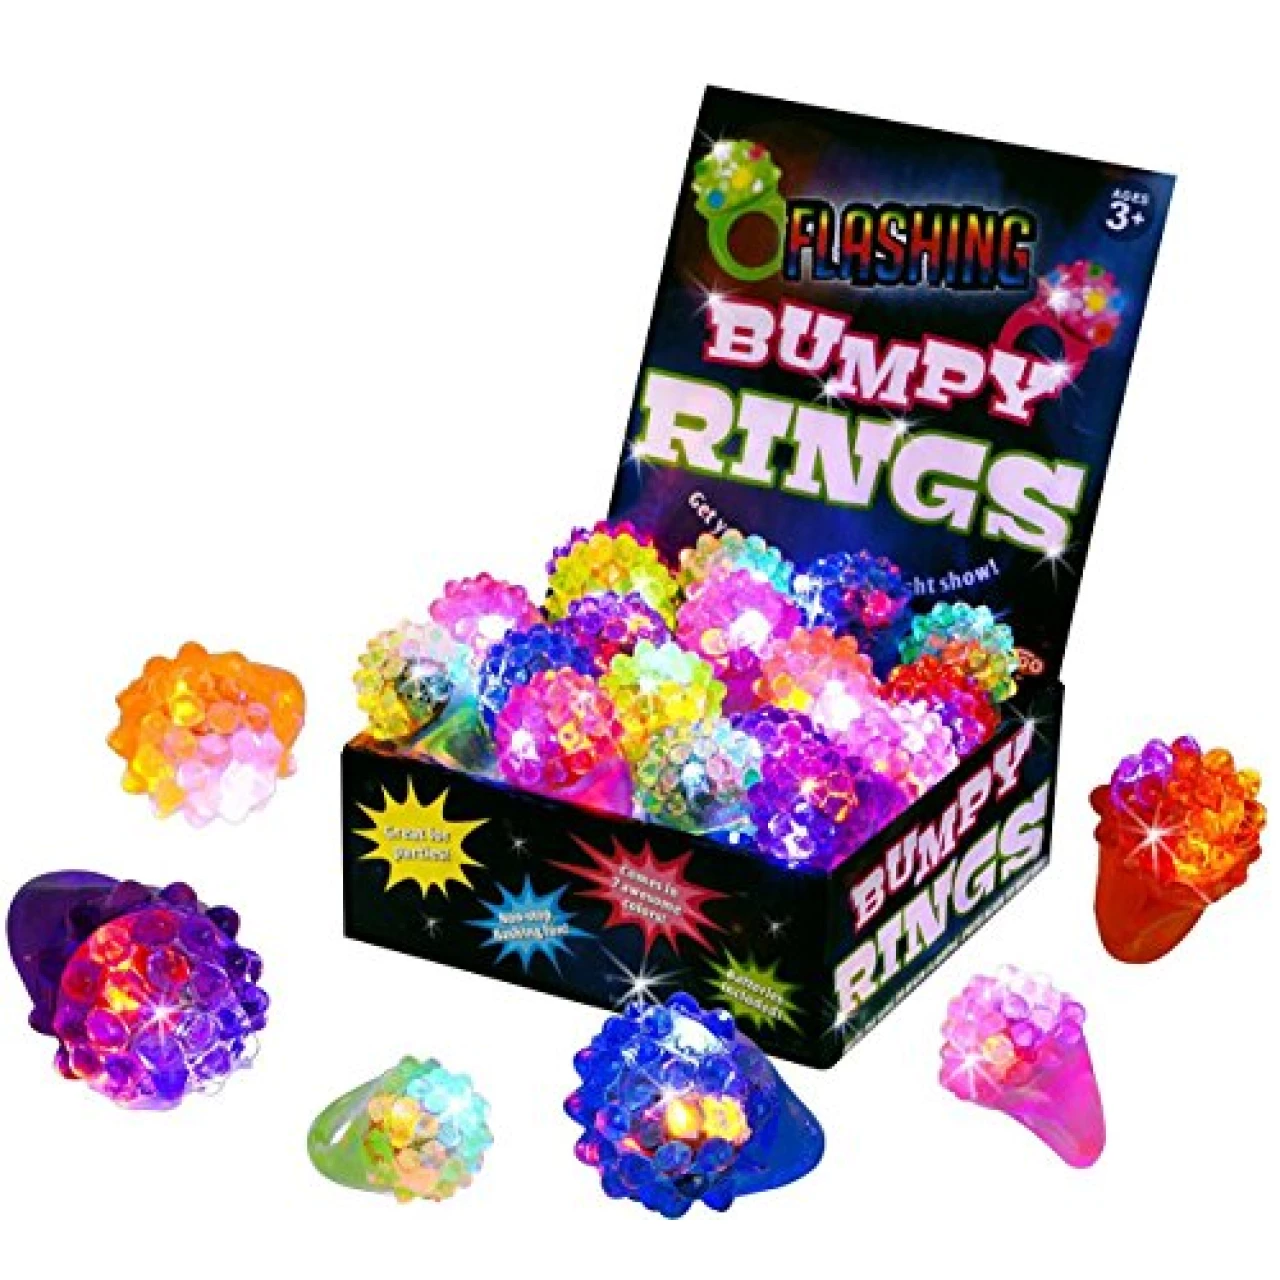 Kangaroo Kids&rsquo; LED Light Up Rings or Glow-in-The-Dark Neon Ring Bumpy Toy Decorations for Birthday Party Favors, Glow Party Favors, Small Toys for Kids Prizes, Surprise Toys for Girls, Boys, 18 Pack